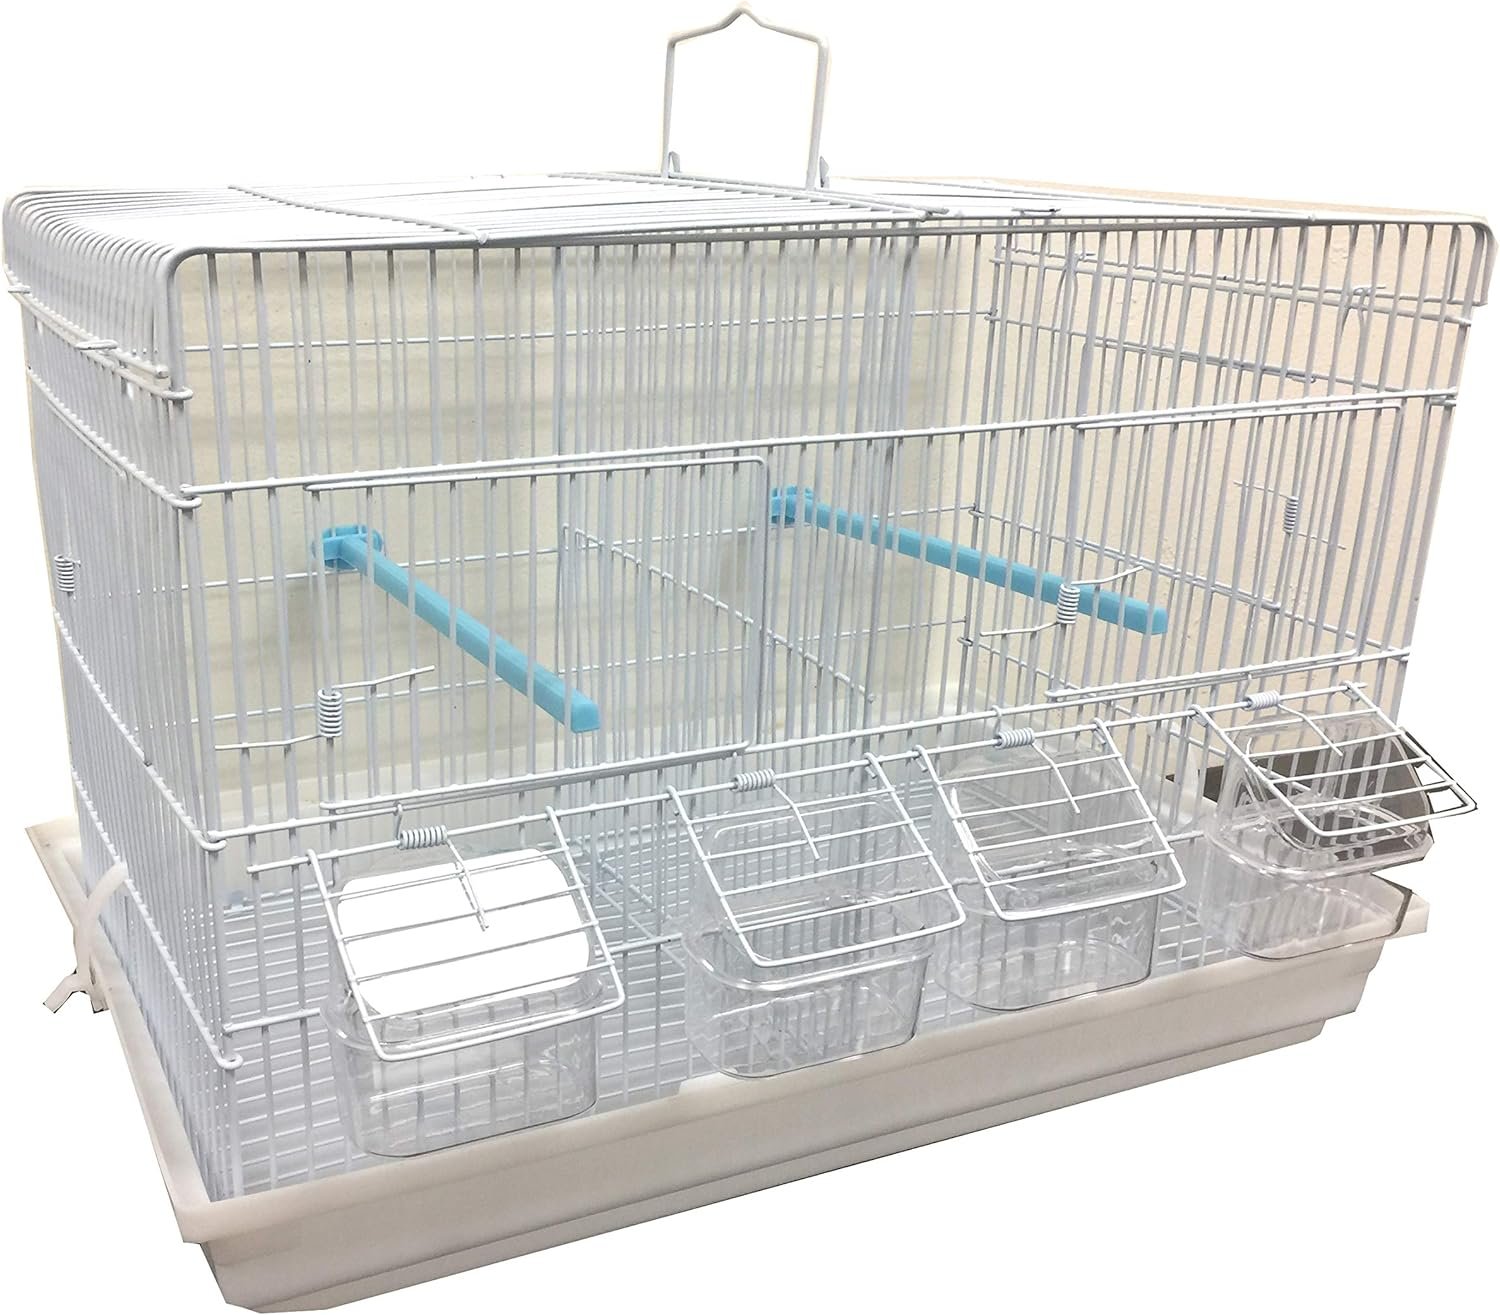 New Aviary Finches Canaries Breeder Bird Parrot Breeding Travel Vet Carrier Cage with Center Divider (One Cage)